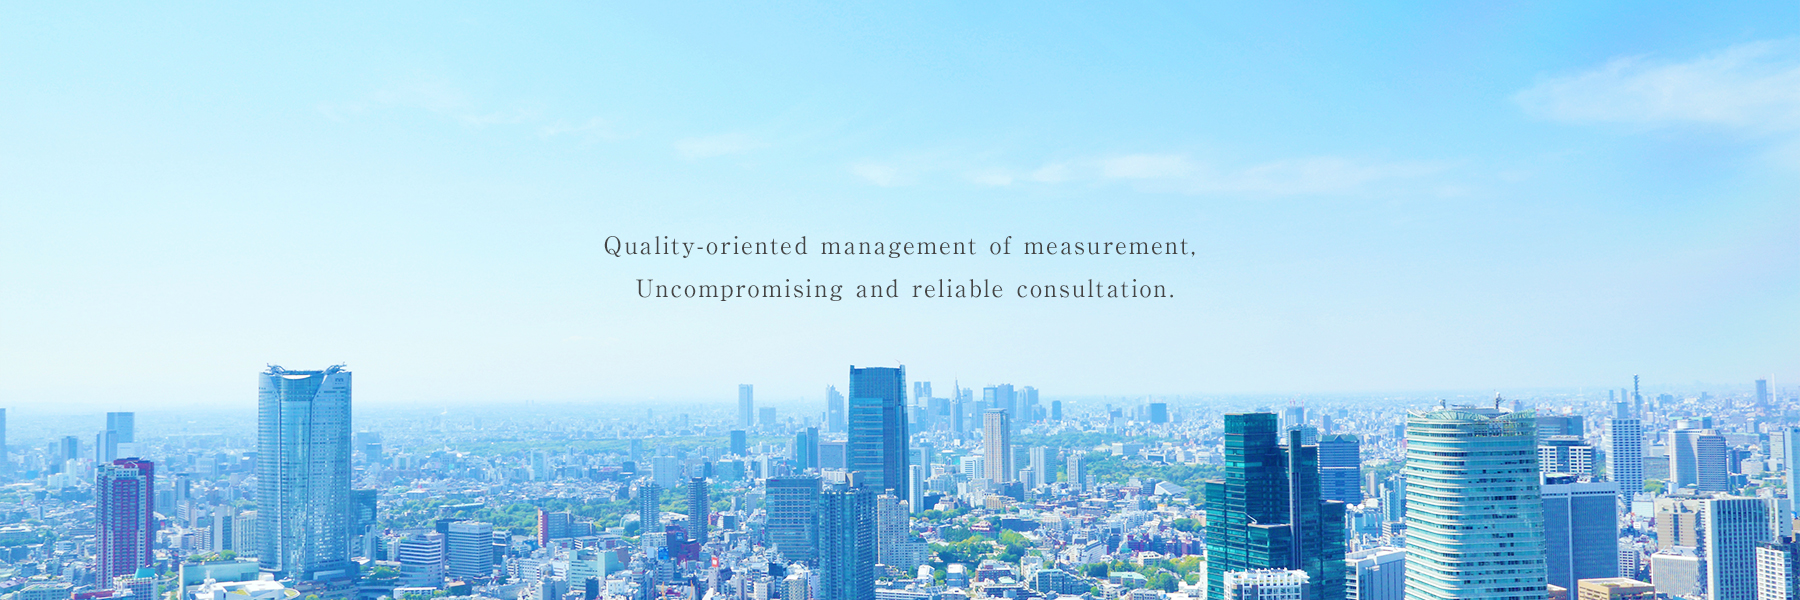 Quality-oriented management of measurement, Uncompromising and reliable consultation.